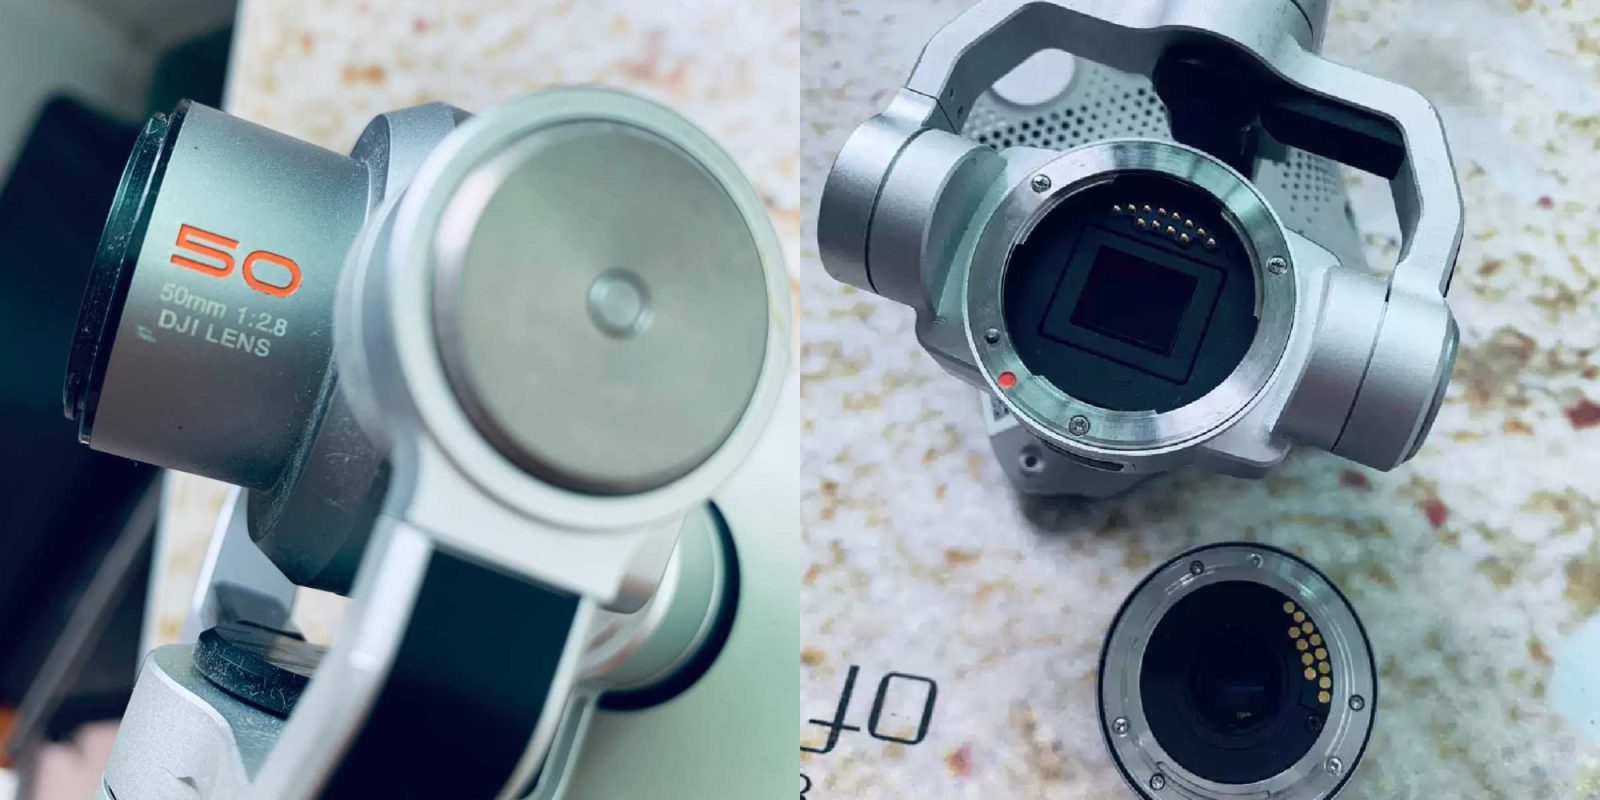 DJI-camera-with-interchangeable-lens-system-F.jpg